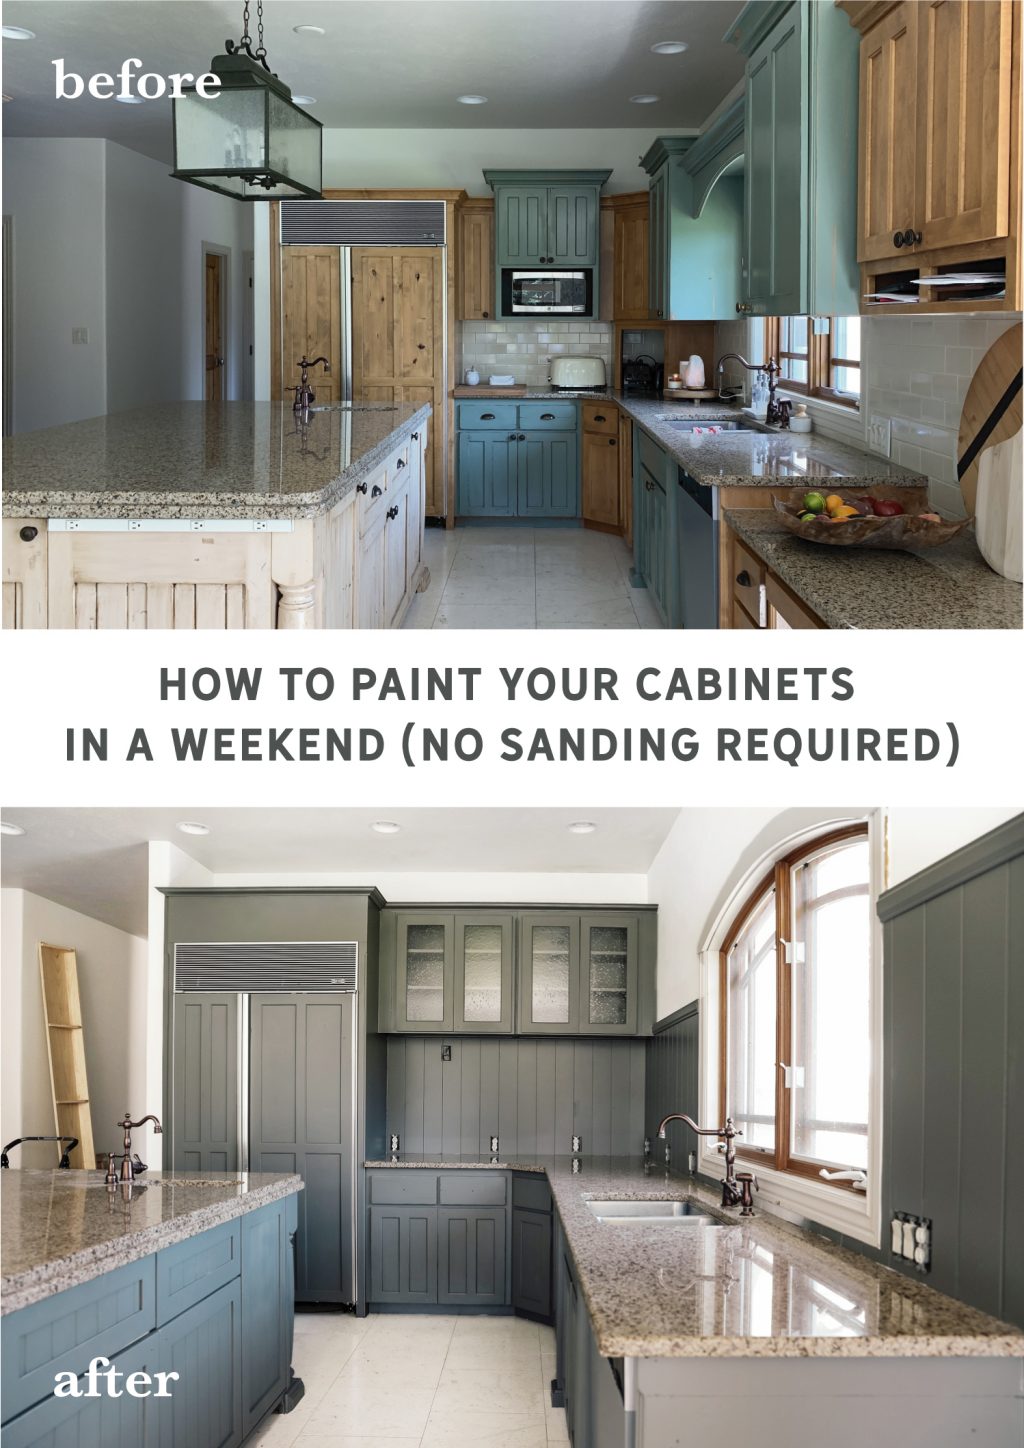 How To Paint Your Cabinets In A Weekend, How To Make Painted Cabinets Shine